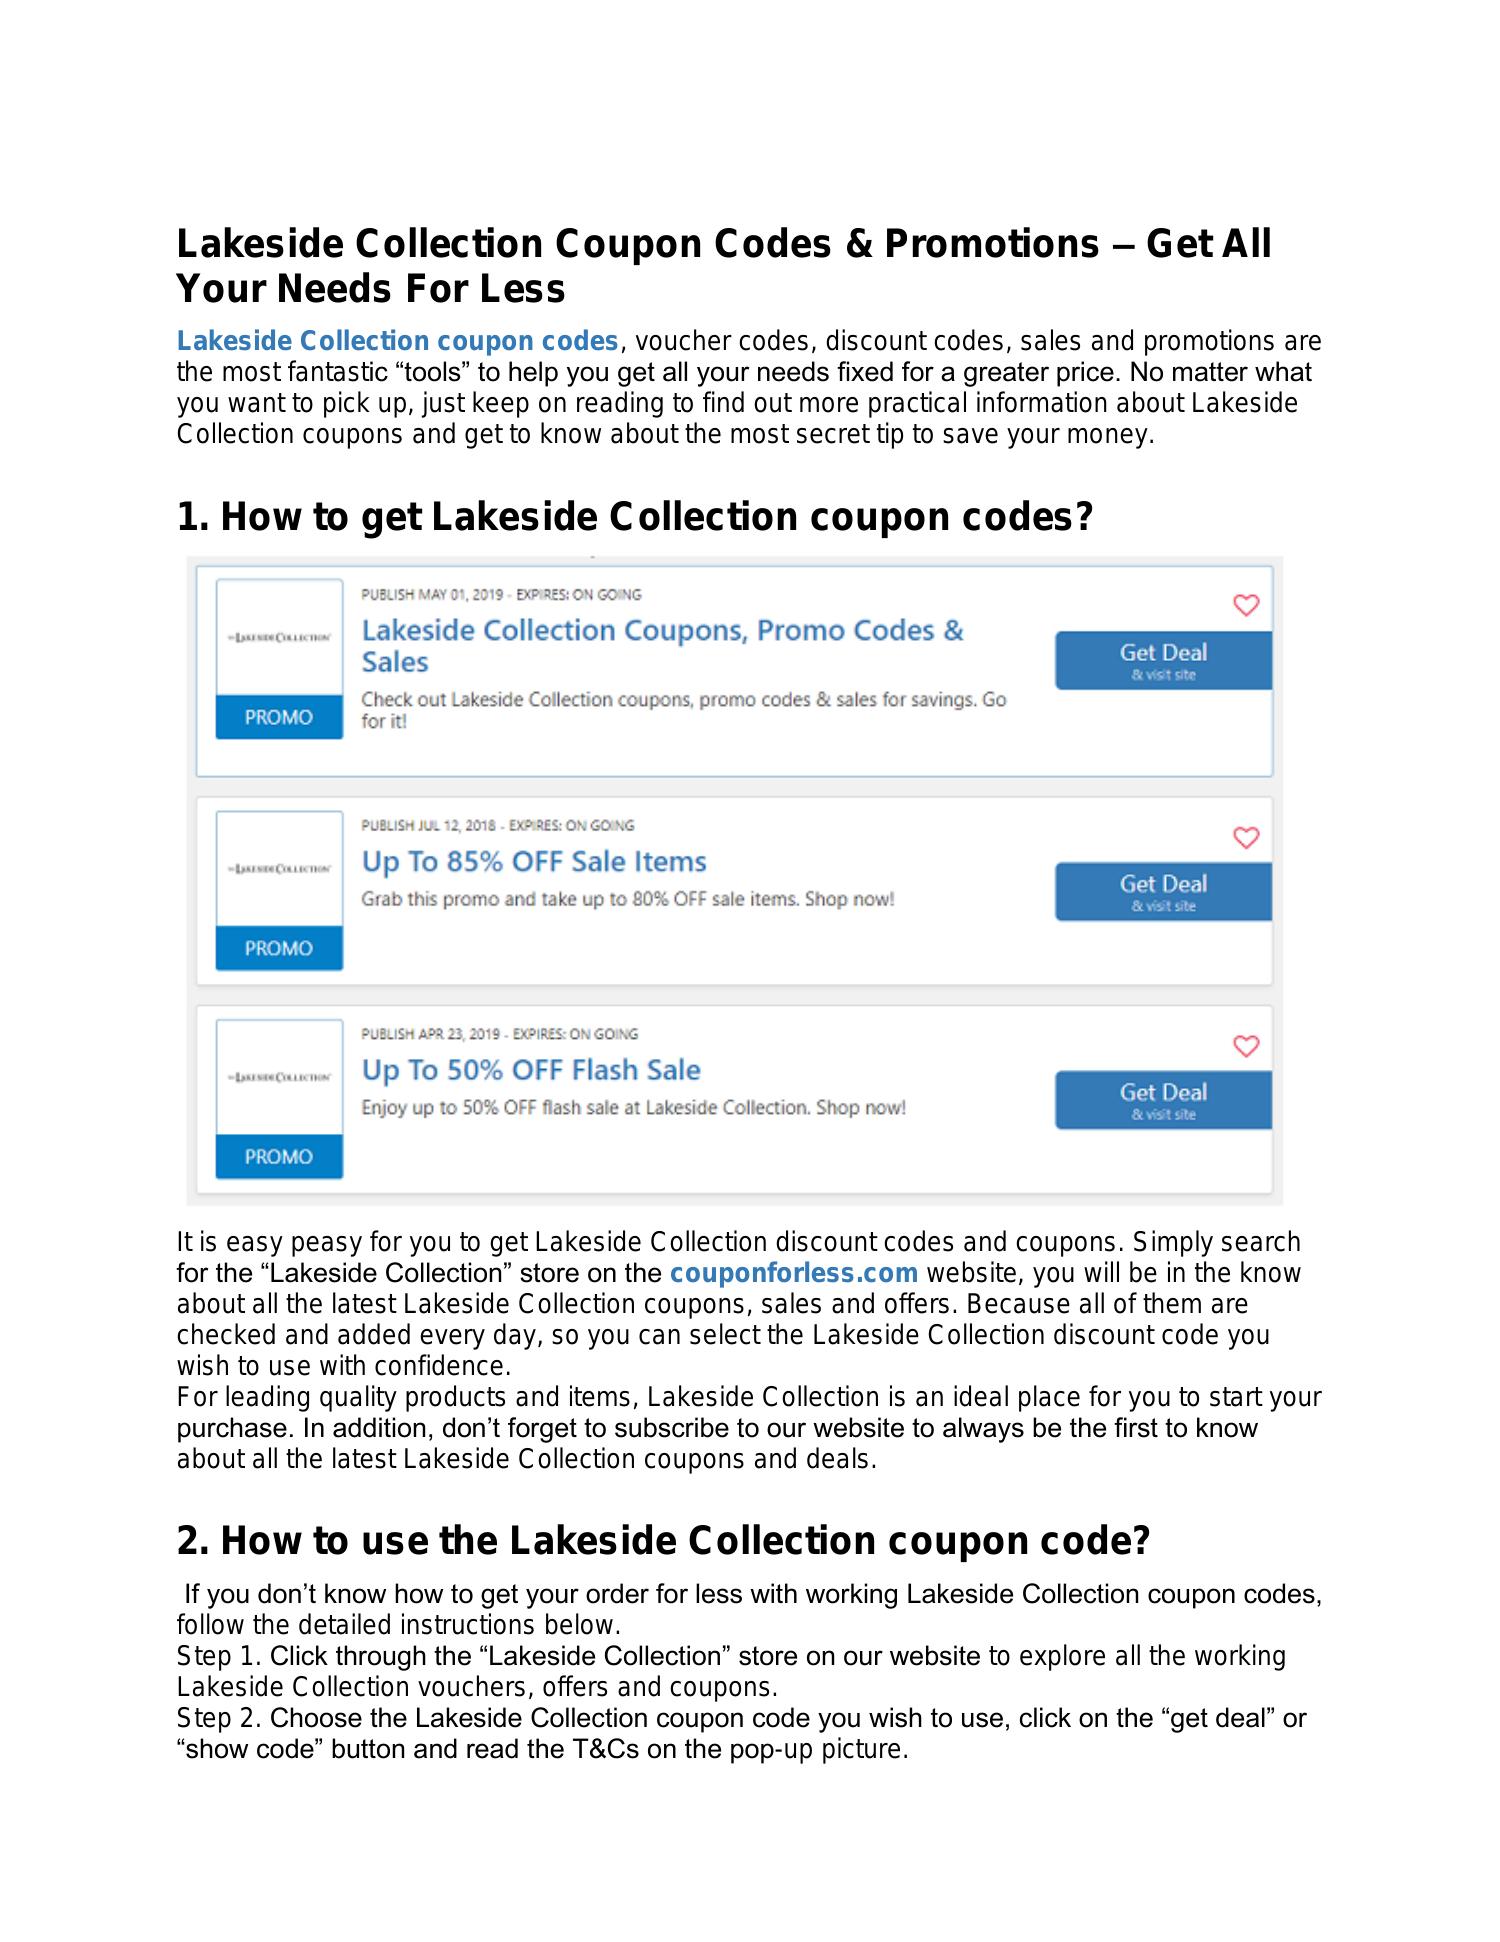 Lakeside Collection Coupon Codes & Promotions Get All Your Needs For